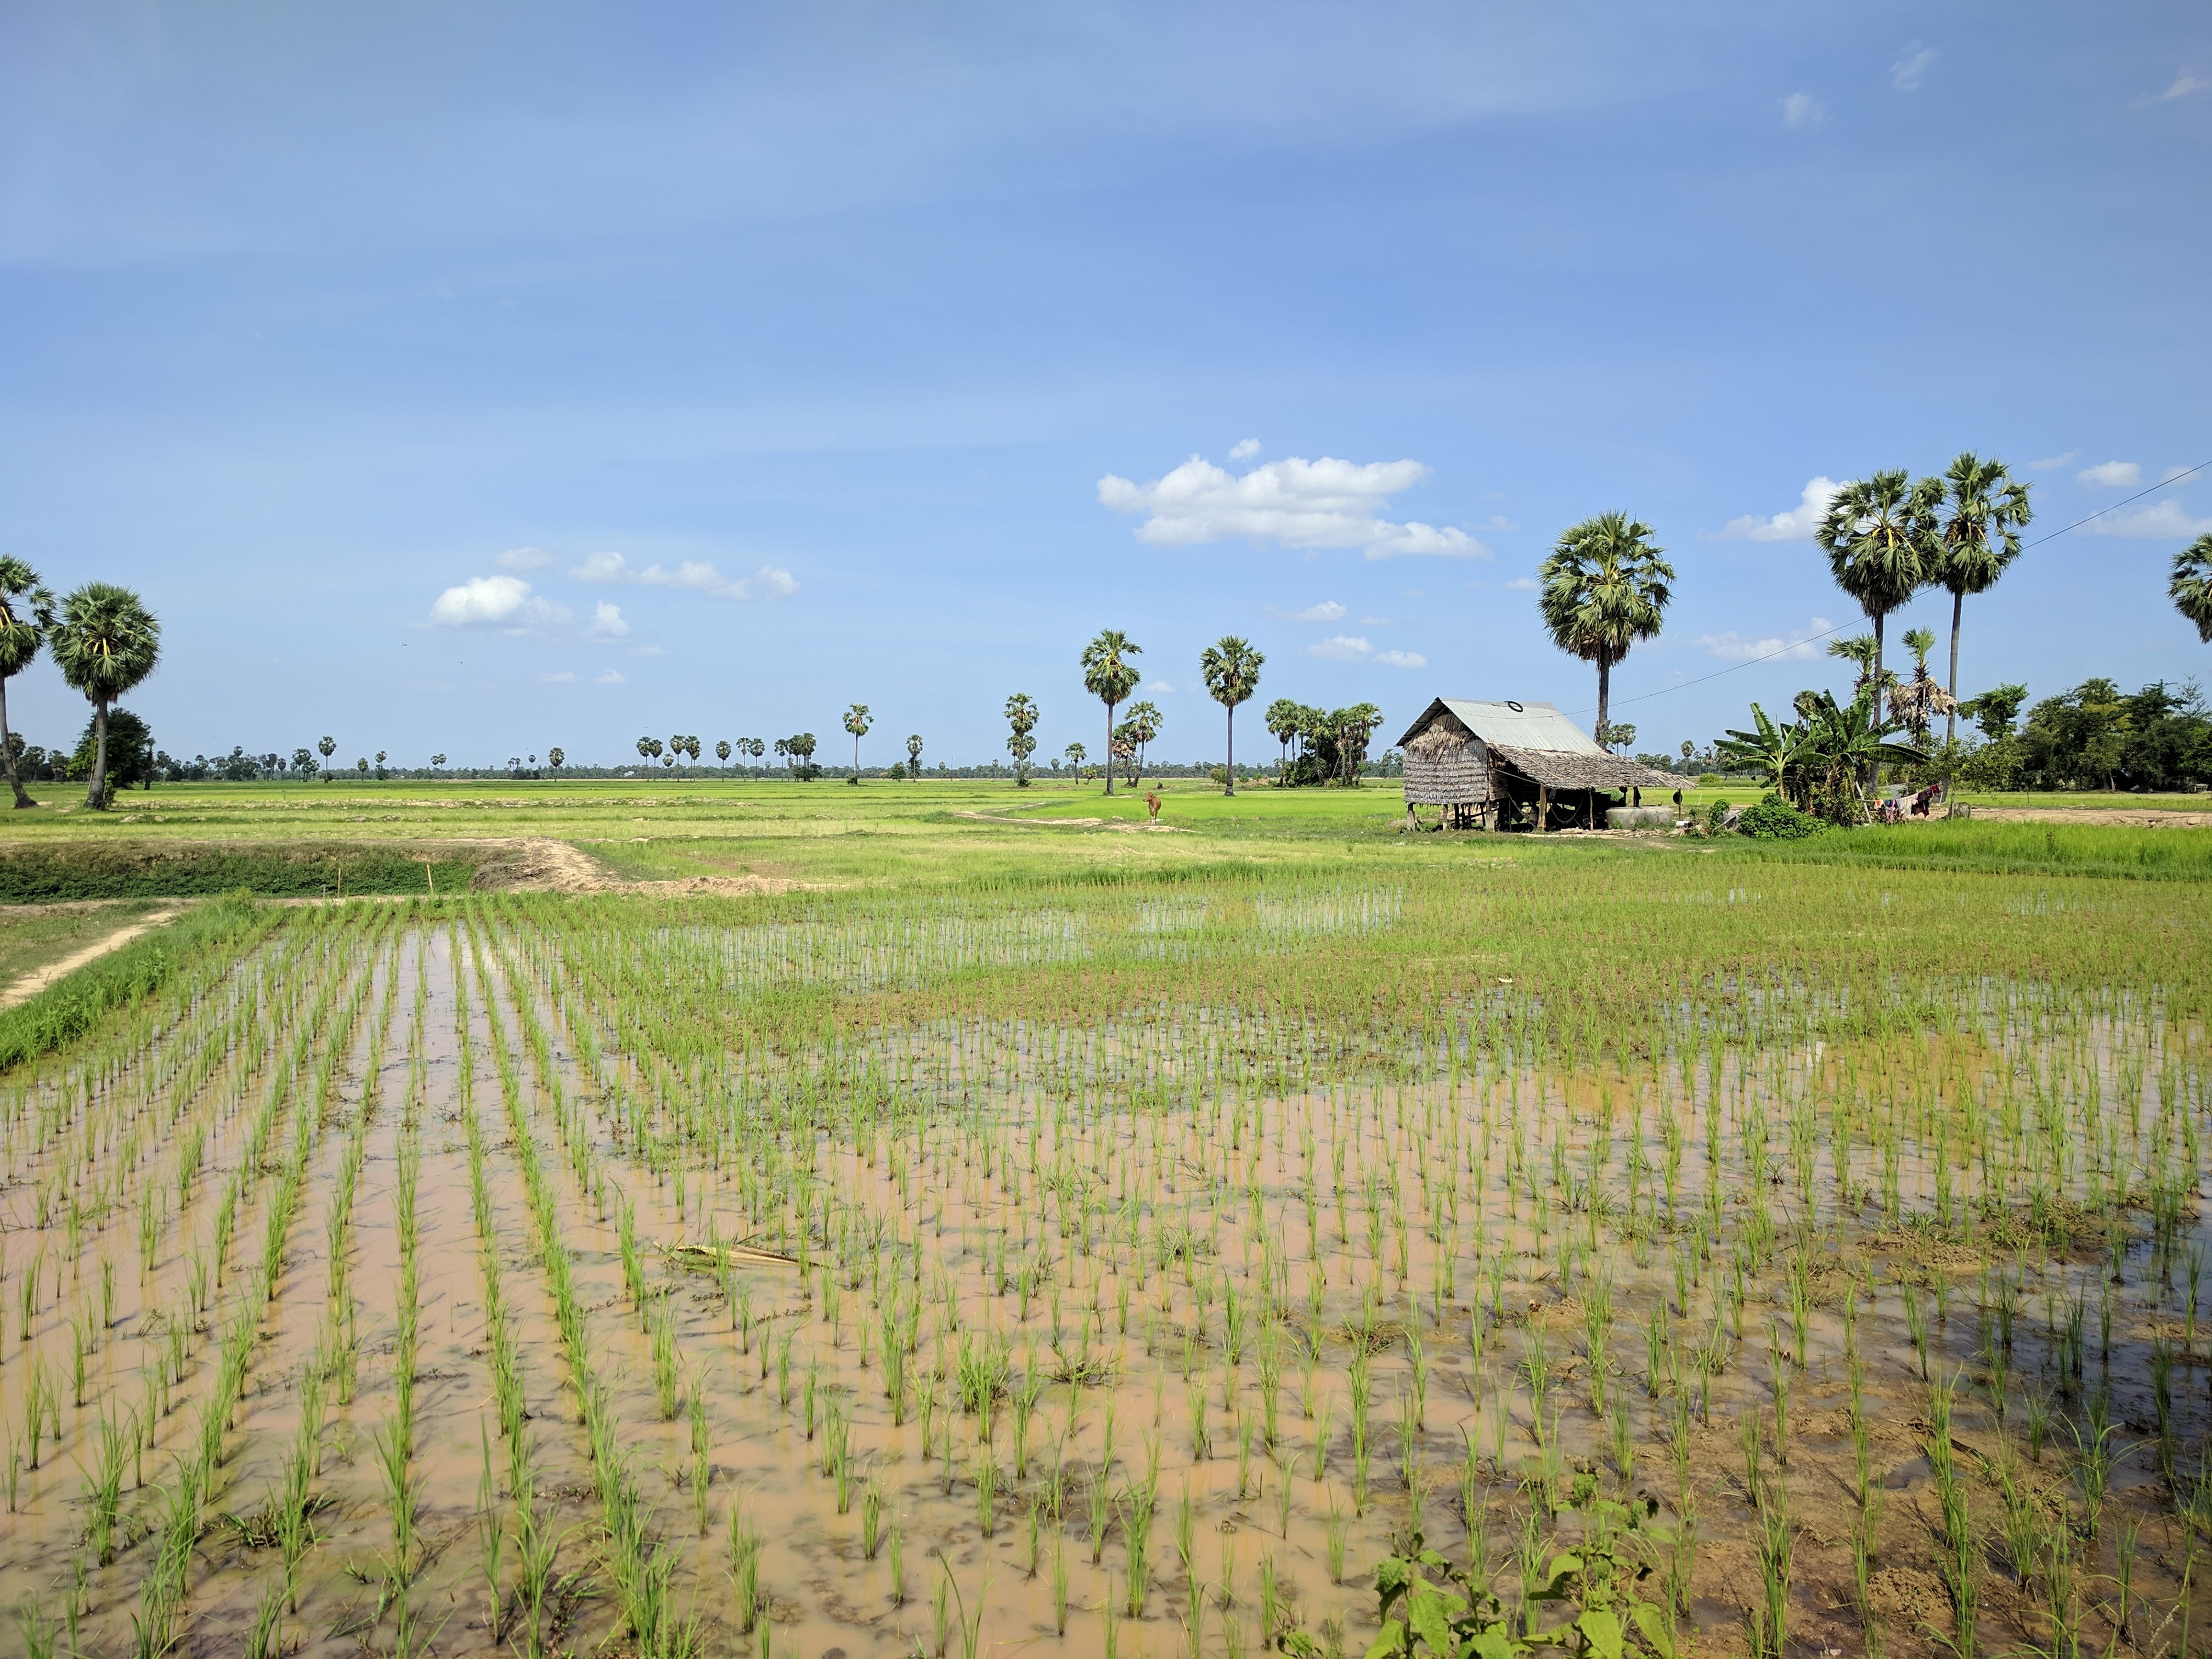 Green rice fields in the Pursat province of Cambodia.